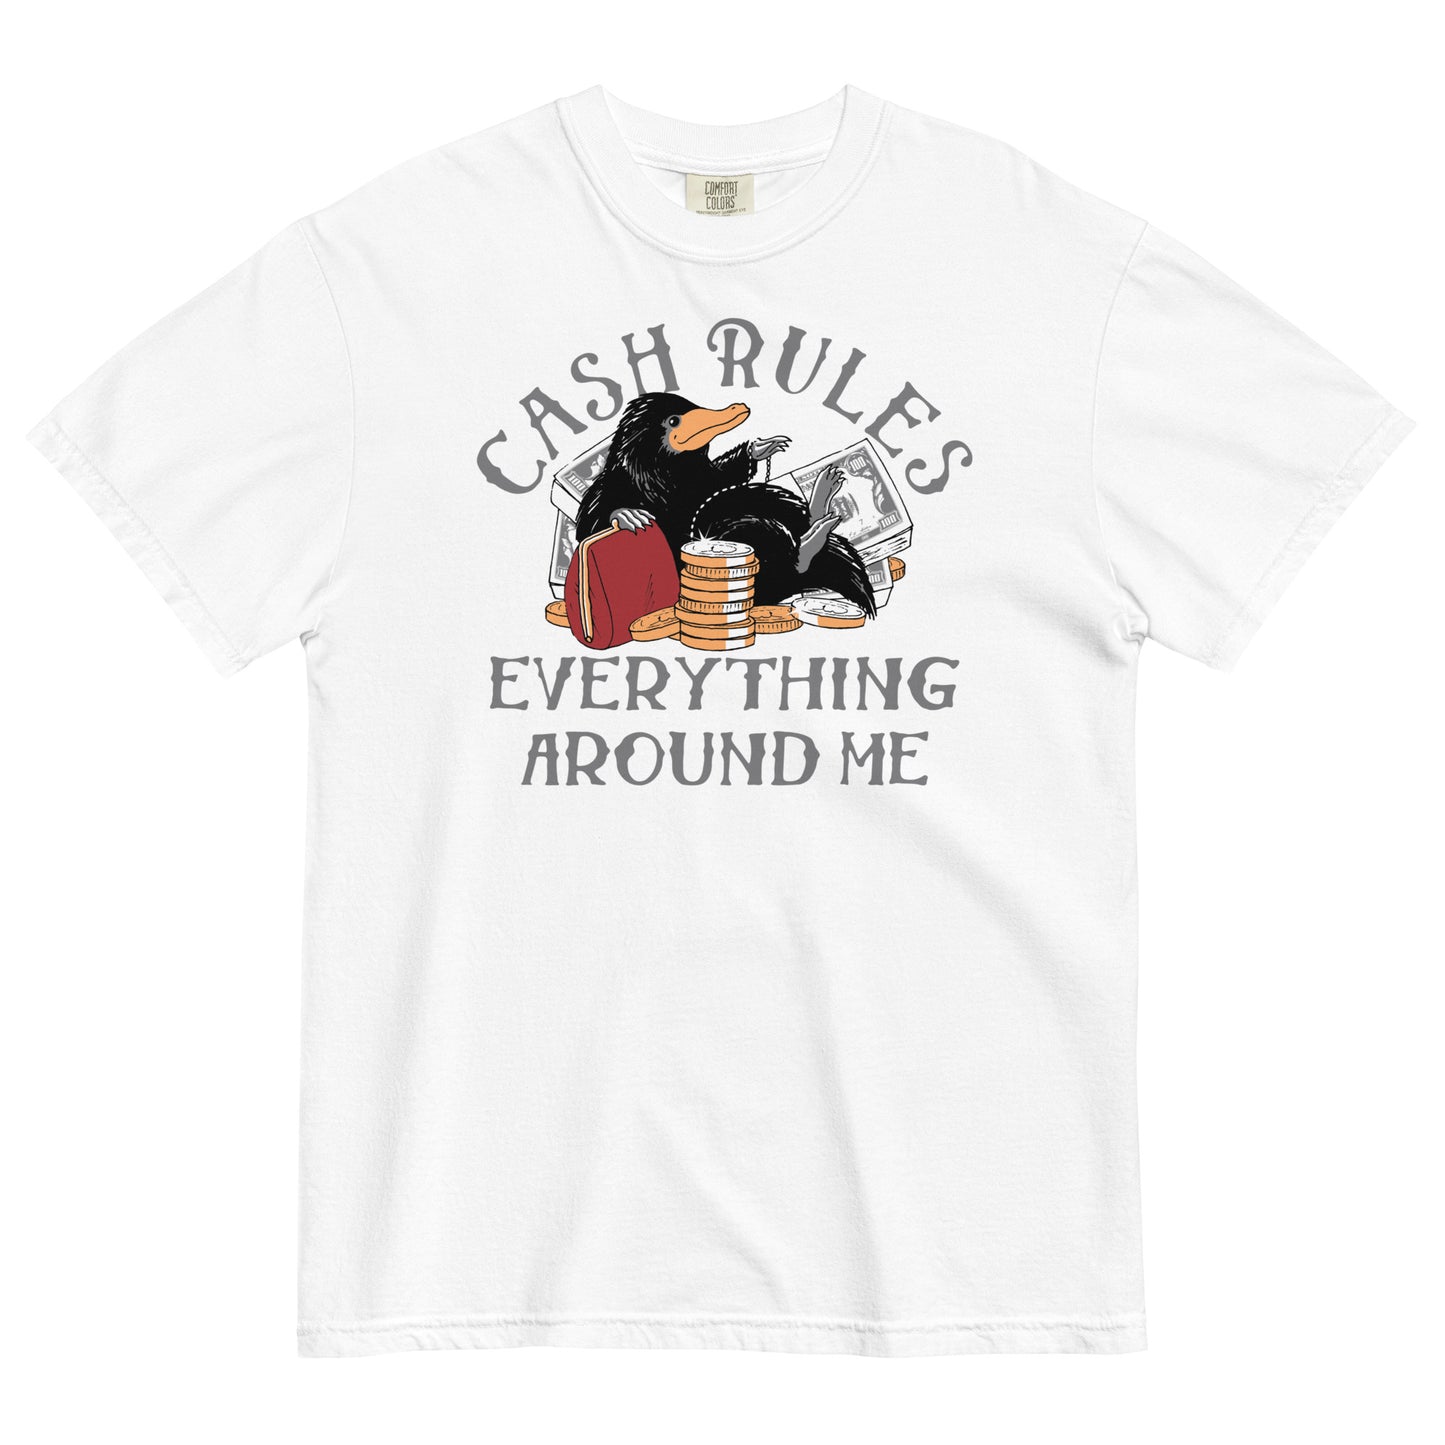 Cash Rules Everything Around Me Men's Relaxed Fit Tee